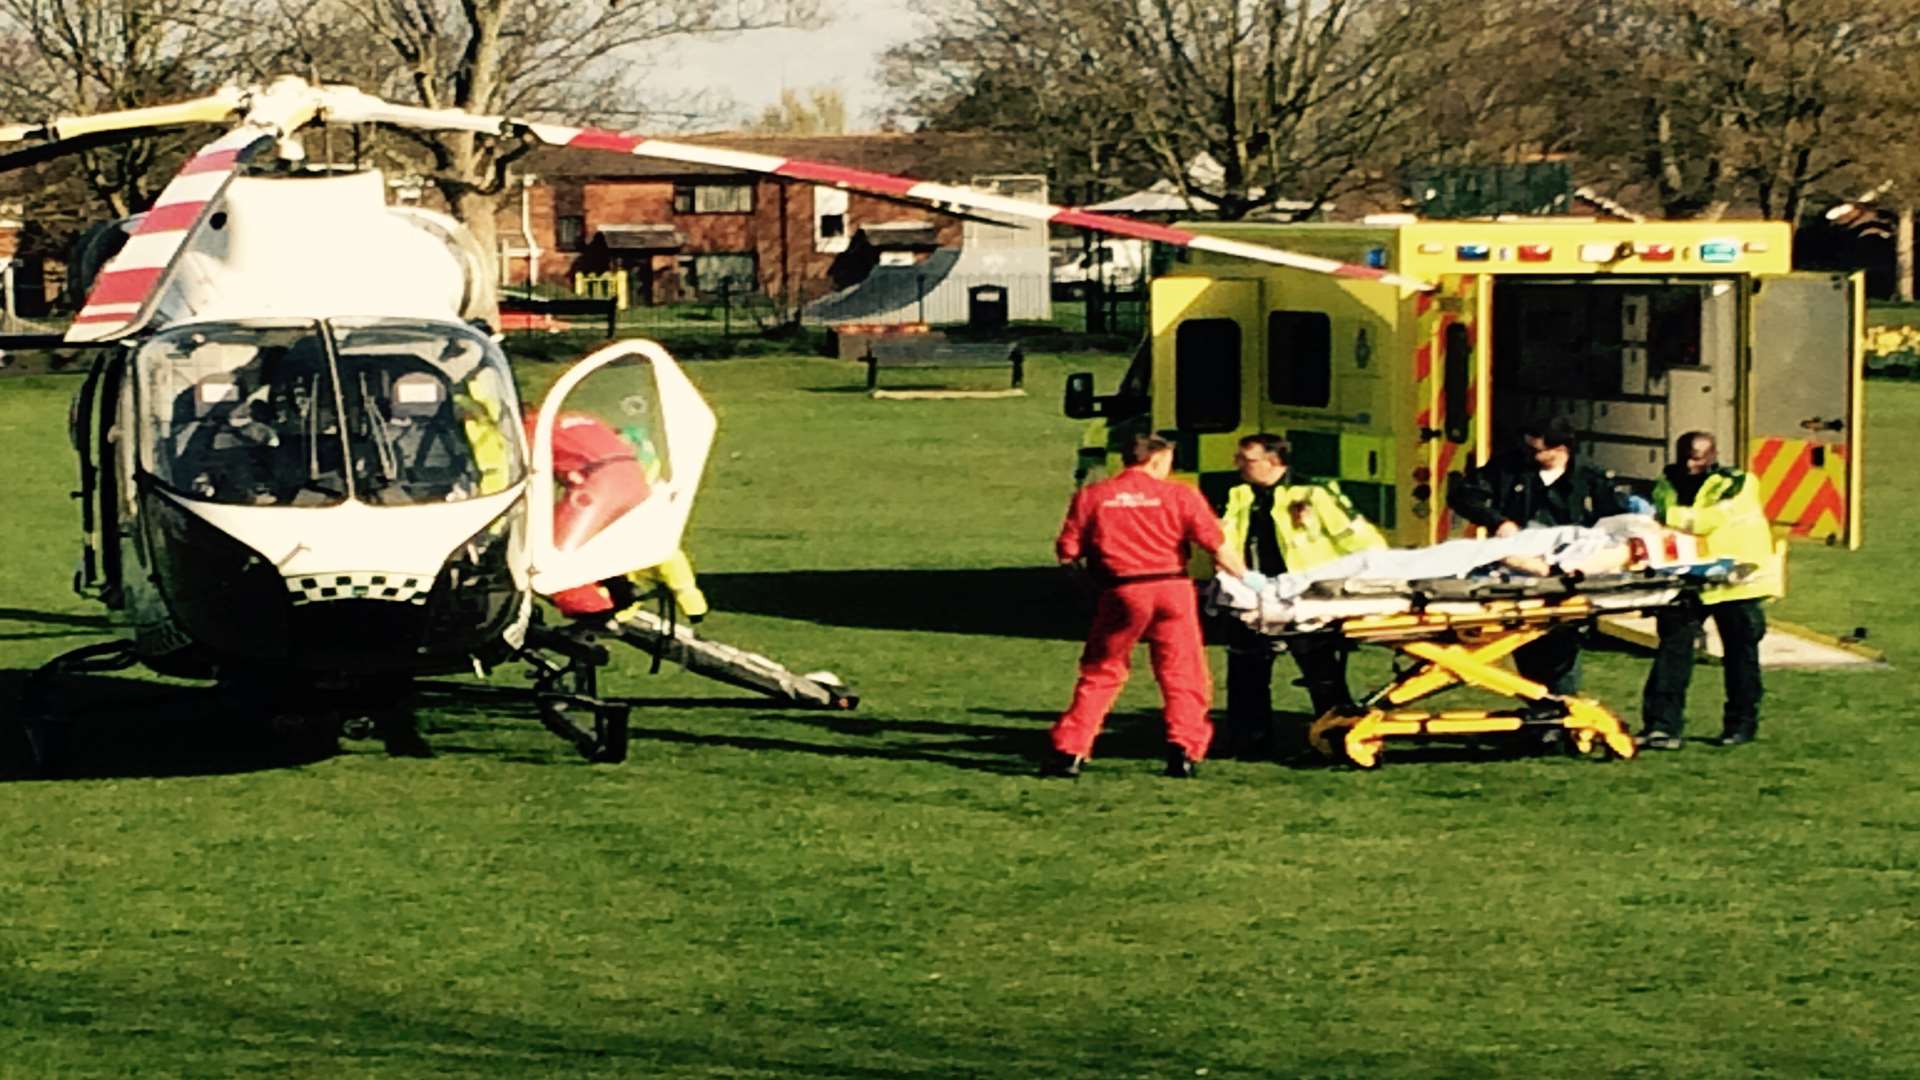 The man was flown to hospital in the air ambulance